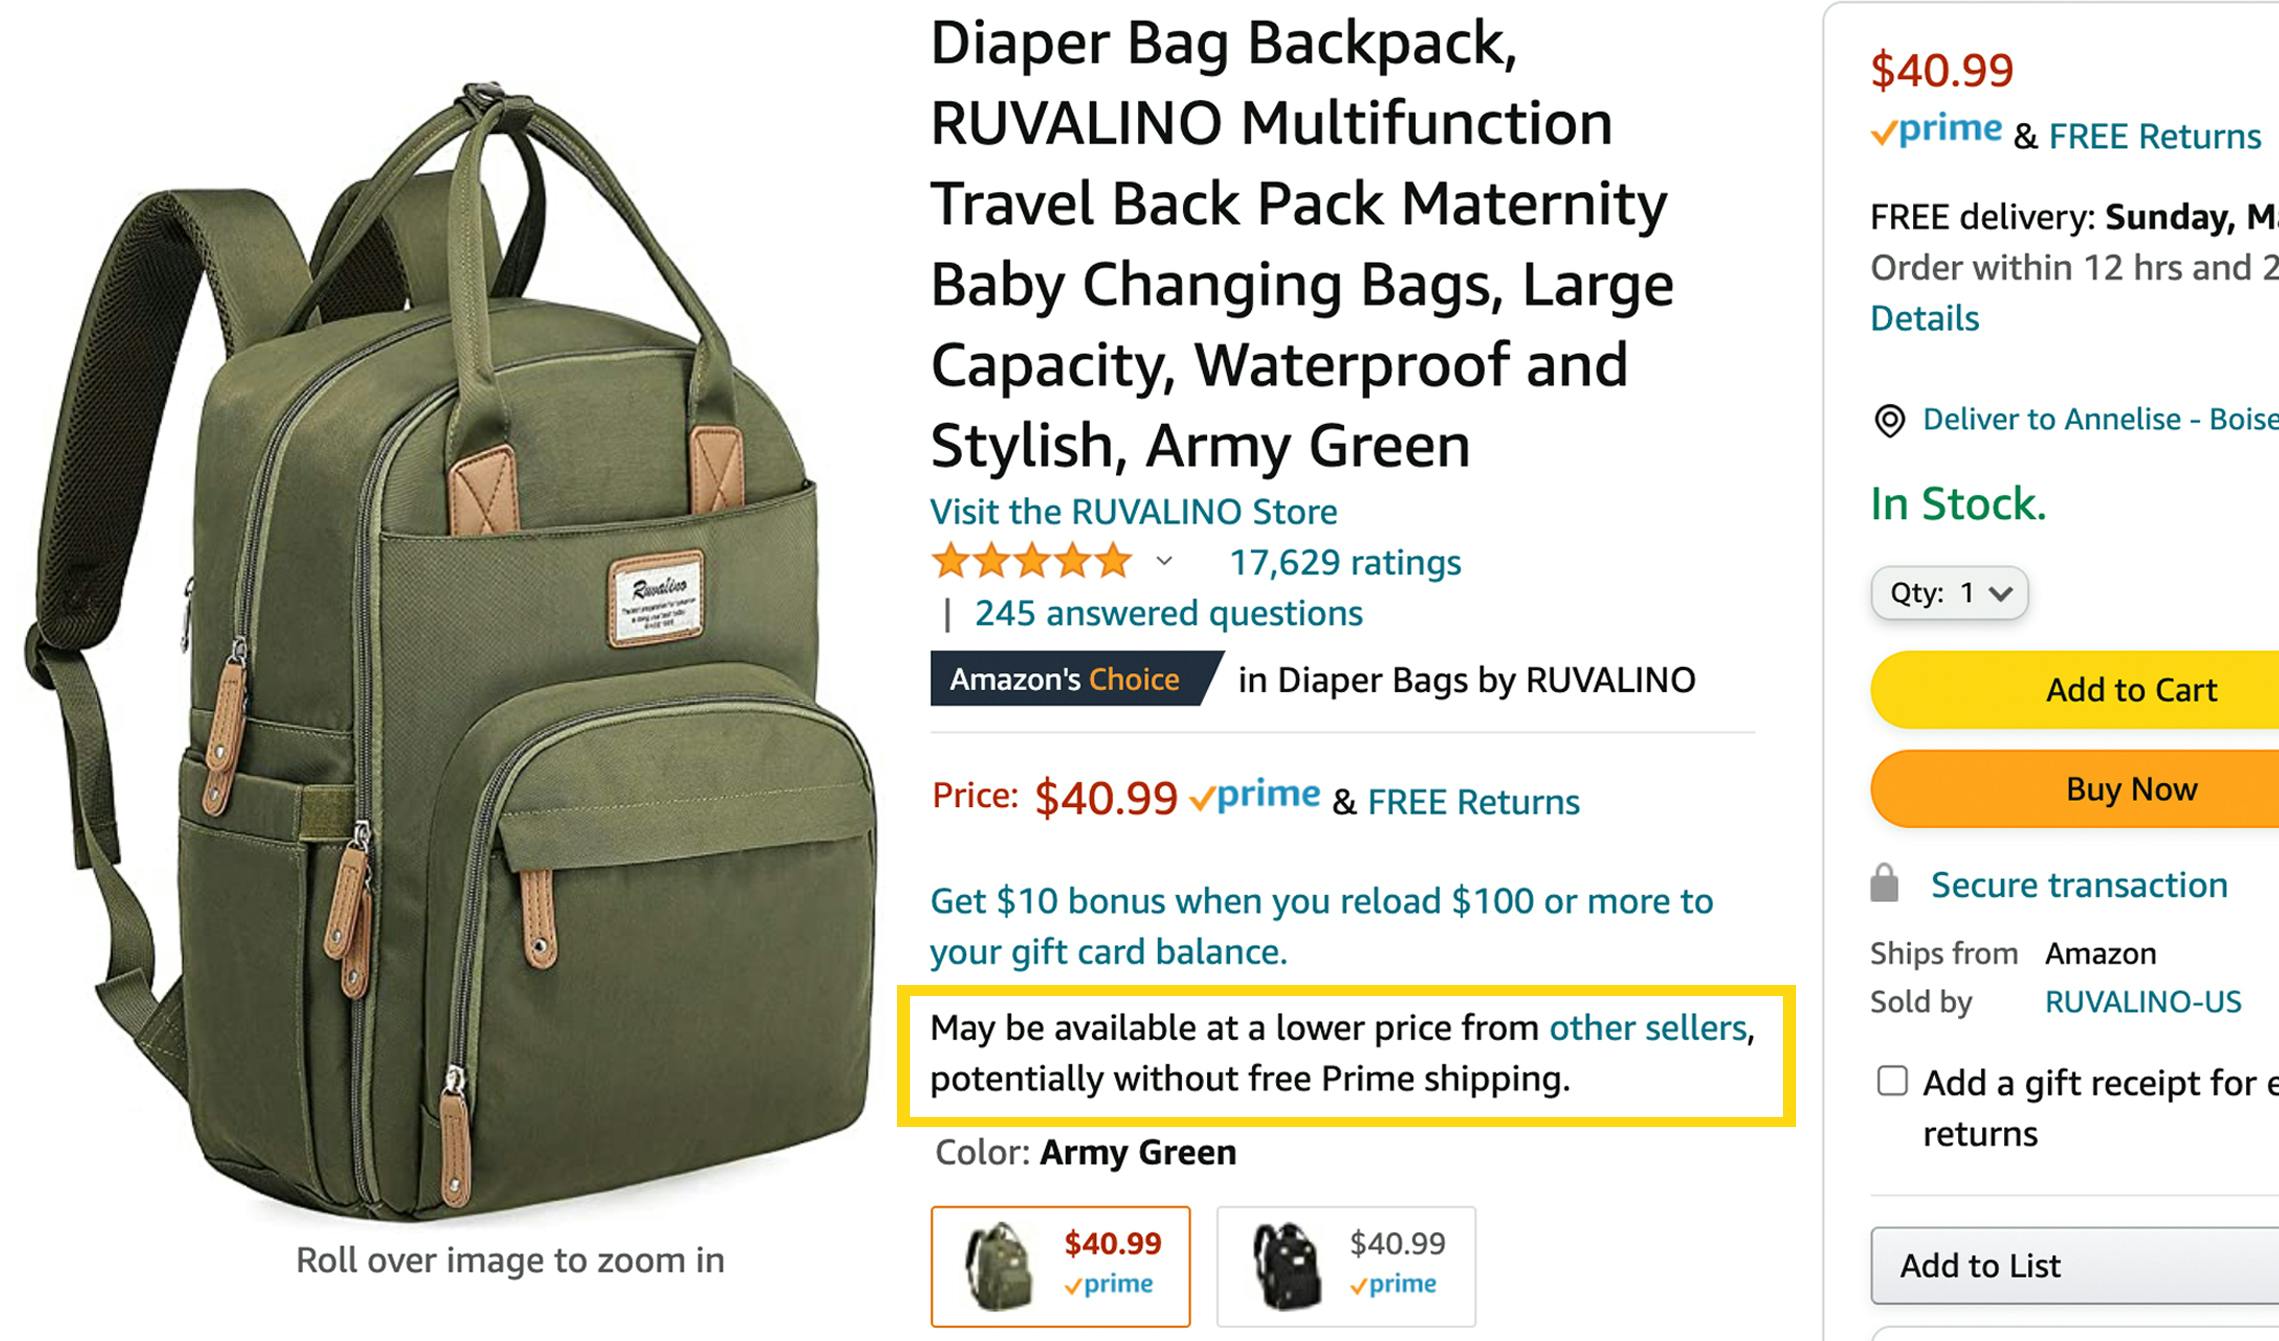 a diaper backpack product listing on Amazon with the section "may be available at a lower price from other retailers" section highlighted on the page